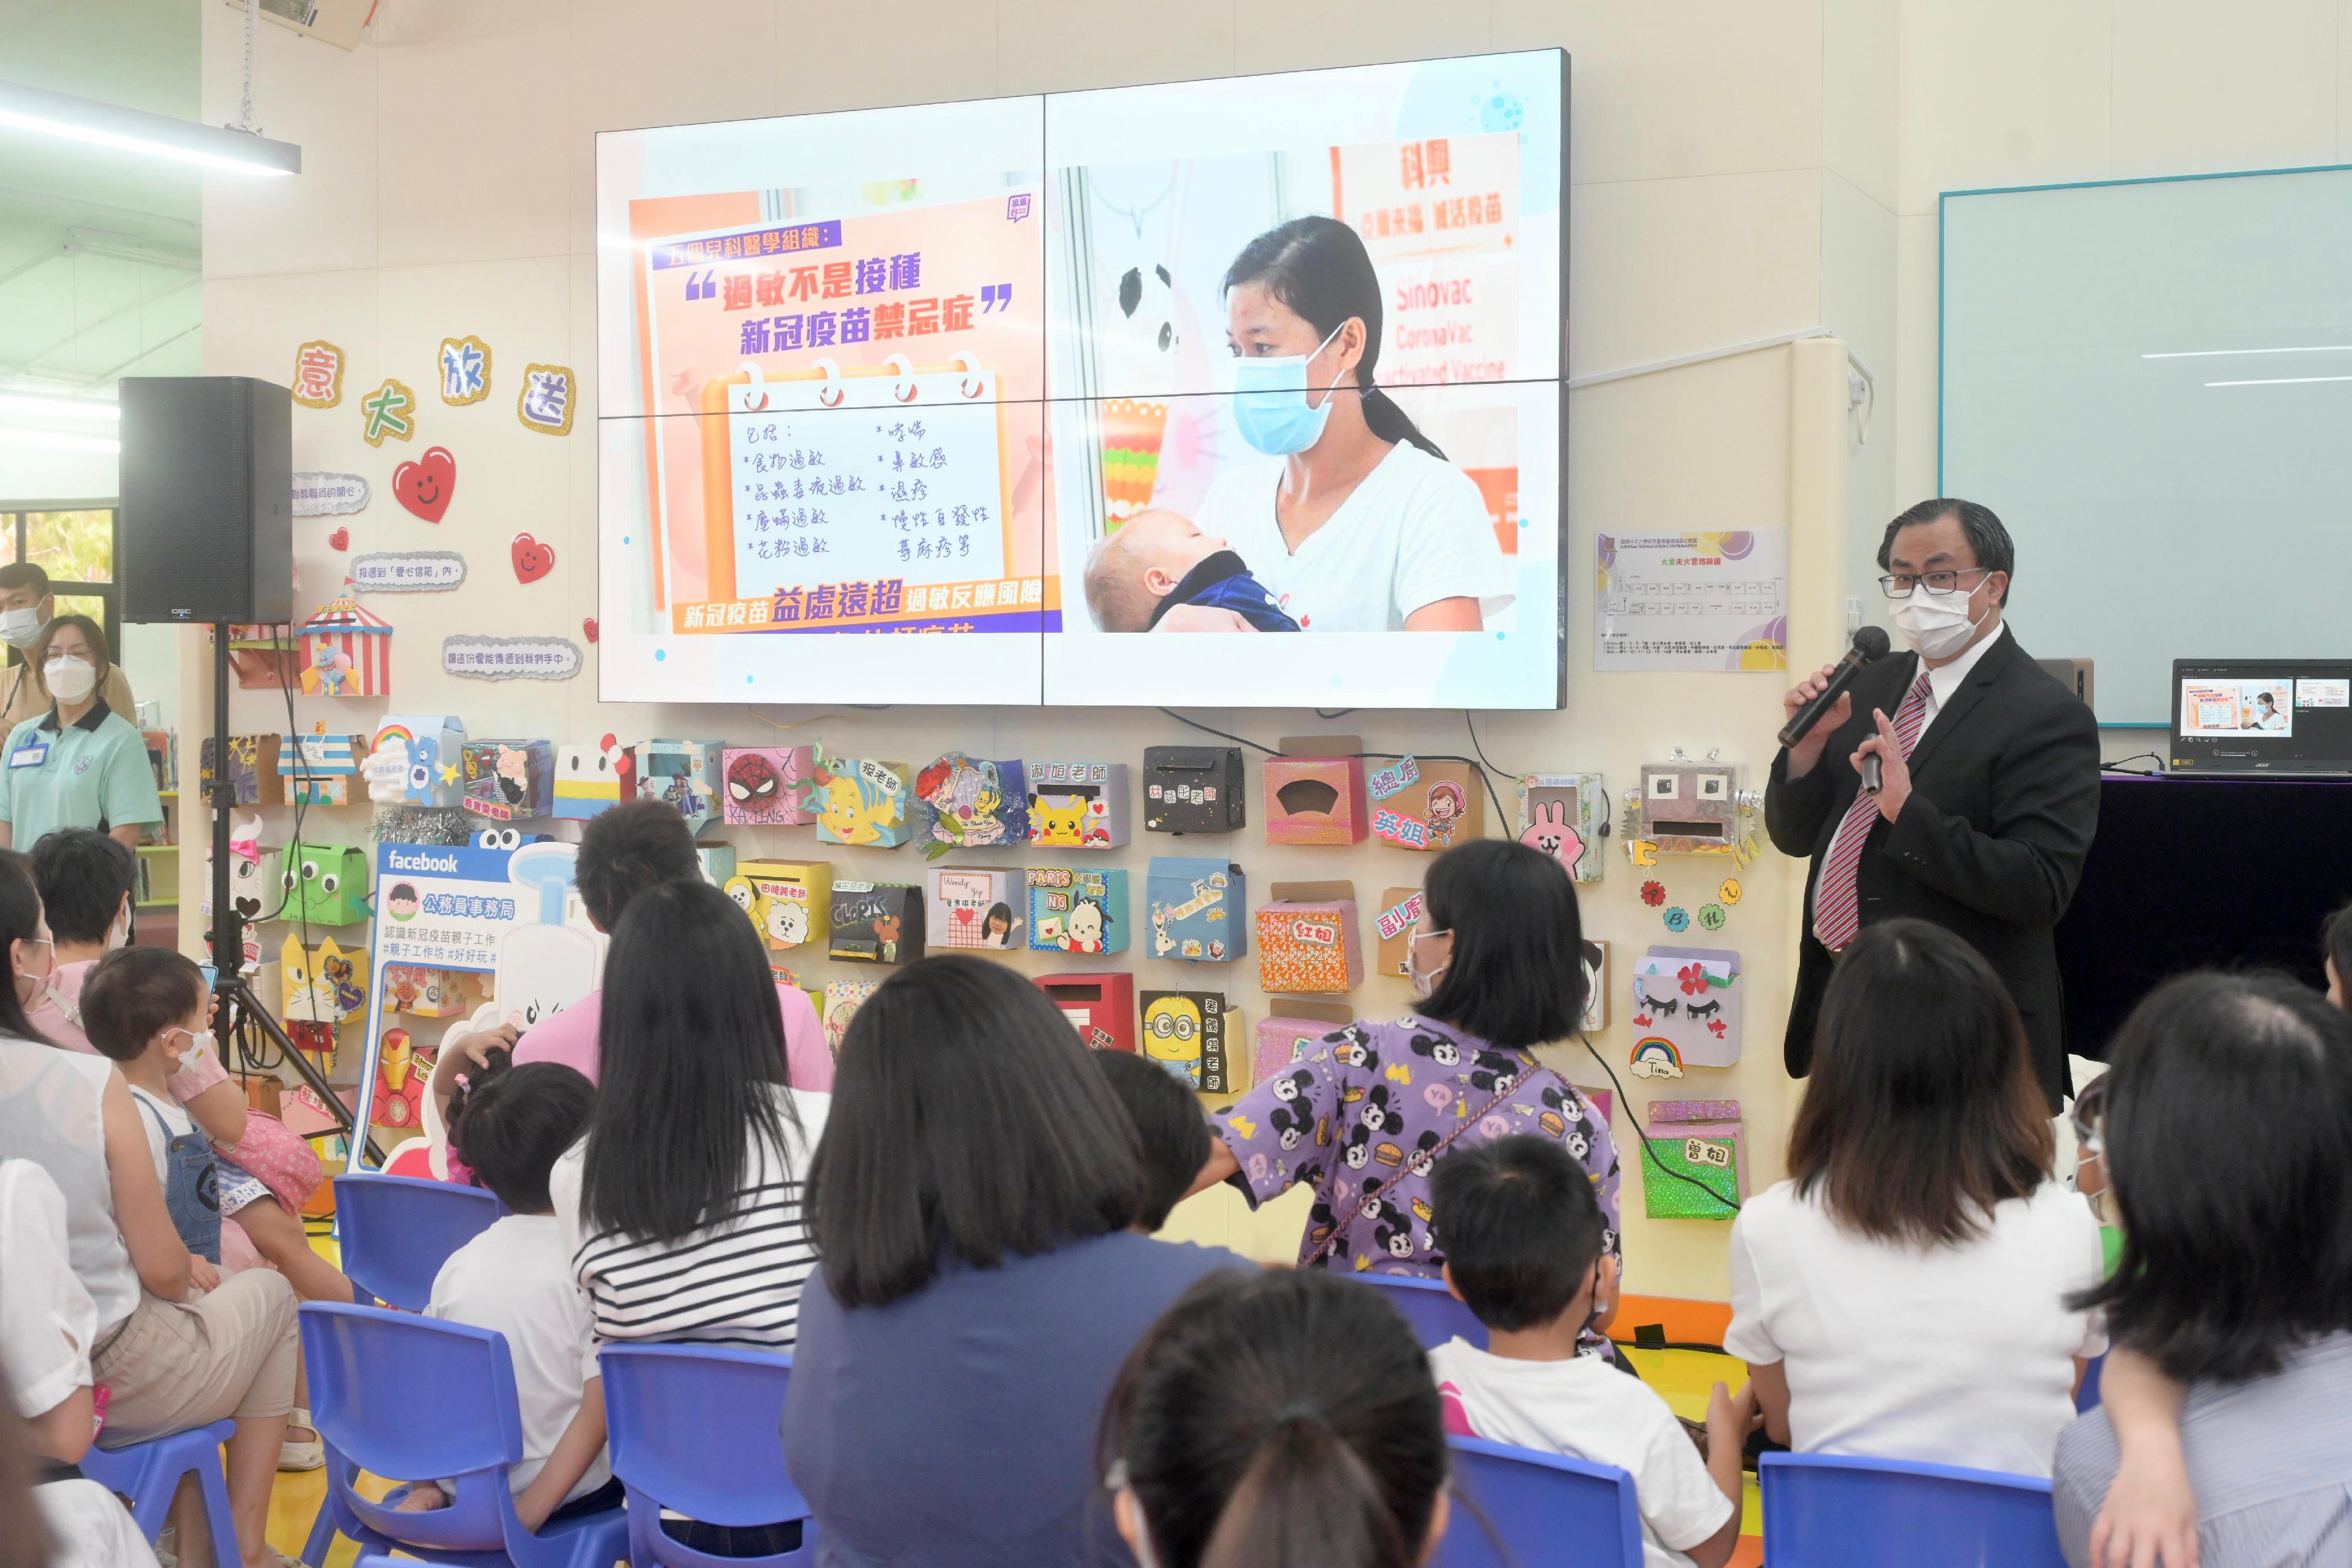 The Government is rolling out a series of promotion and education activities so that parents can have a deeper understanding on the importance of COVID-19 vaccination of children. The first parent-child workshop was conducted at a kindergarten in Ma On Shan today (September 24). Photo shows Honorary Clinical Associate Professor of the Department of Paediatrics and Adolescent Medicine of the Faculty of Medicine of the University of Hong Kong Dr Mike Kwan giving a briefing to parents on COVID-19 vaccines.
